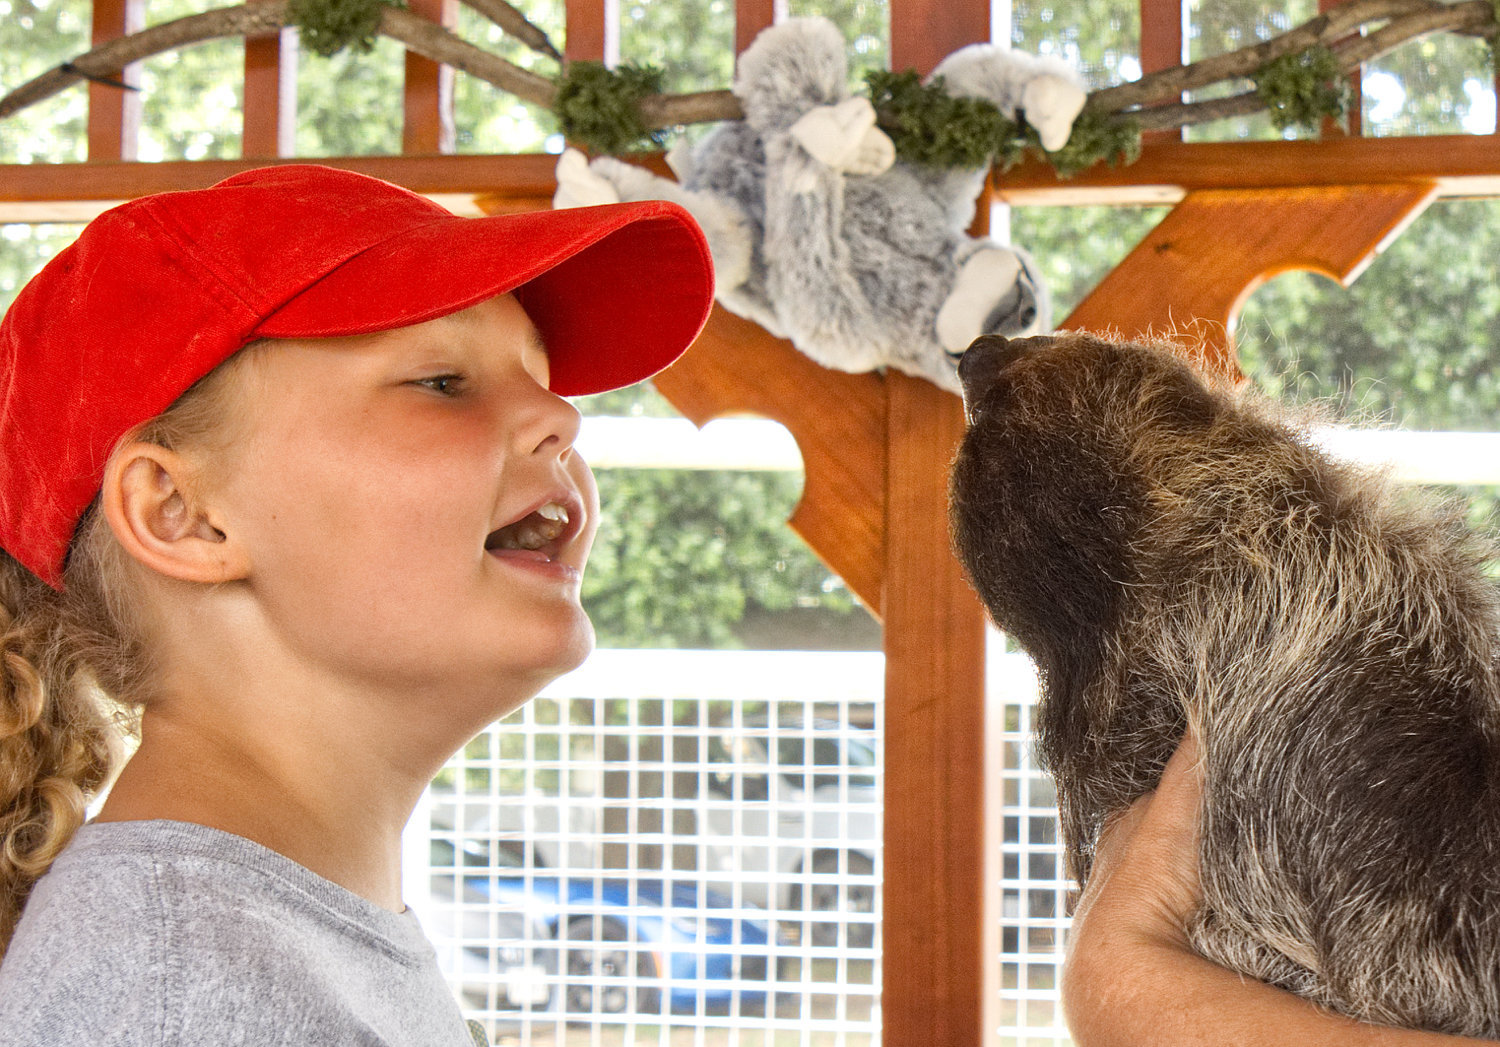 Haley Baker of Canton goes eye to eye with Molasses the sloth last week during a kids camp at Mini S Exotic Zoo just outside Mineola. (Monitor photo by Sam Major)